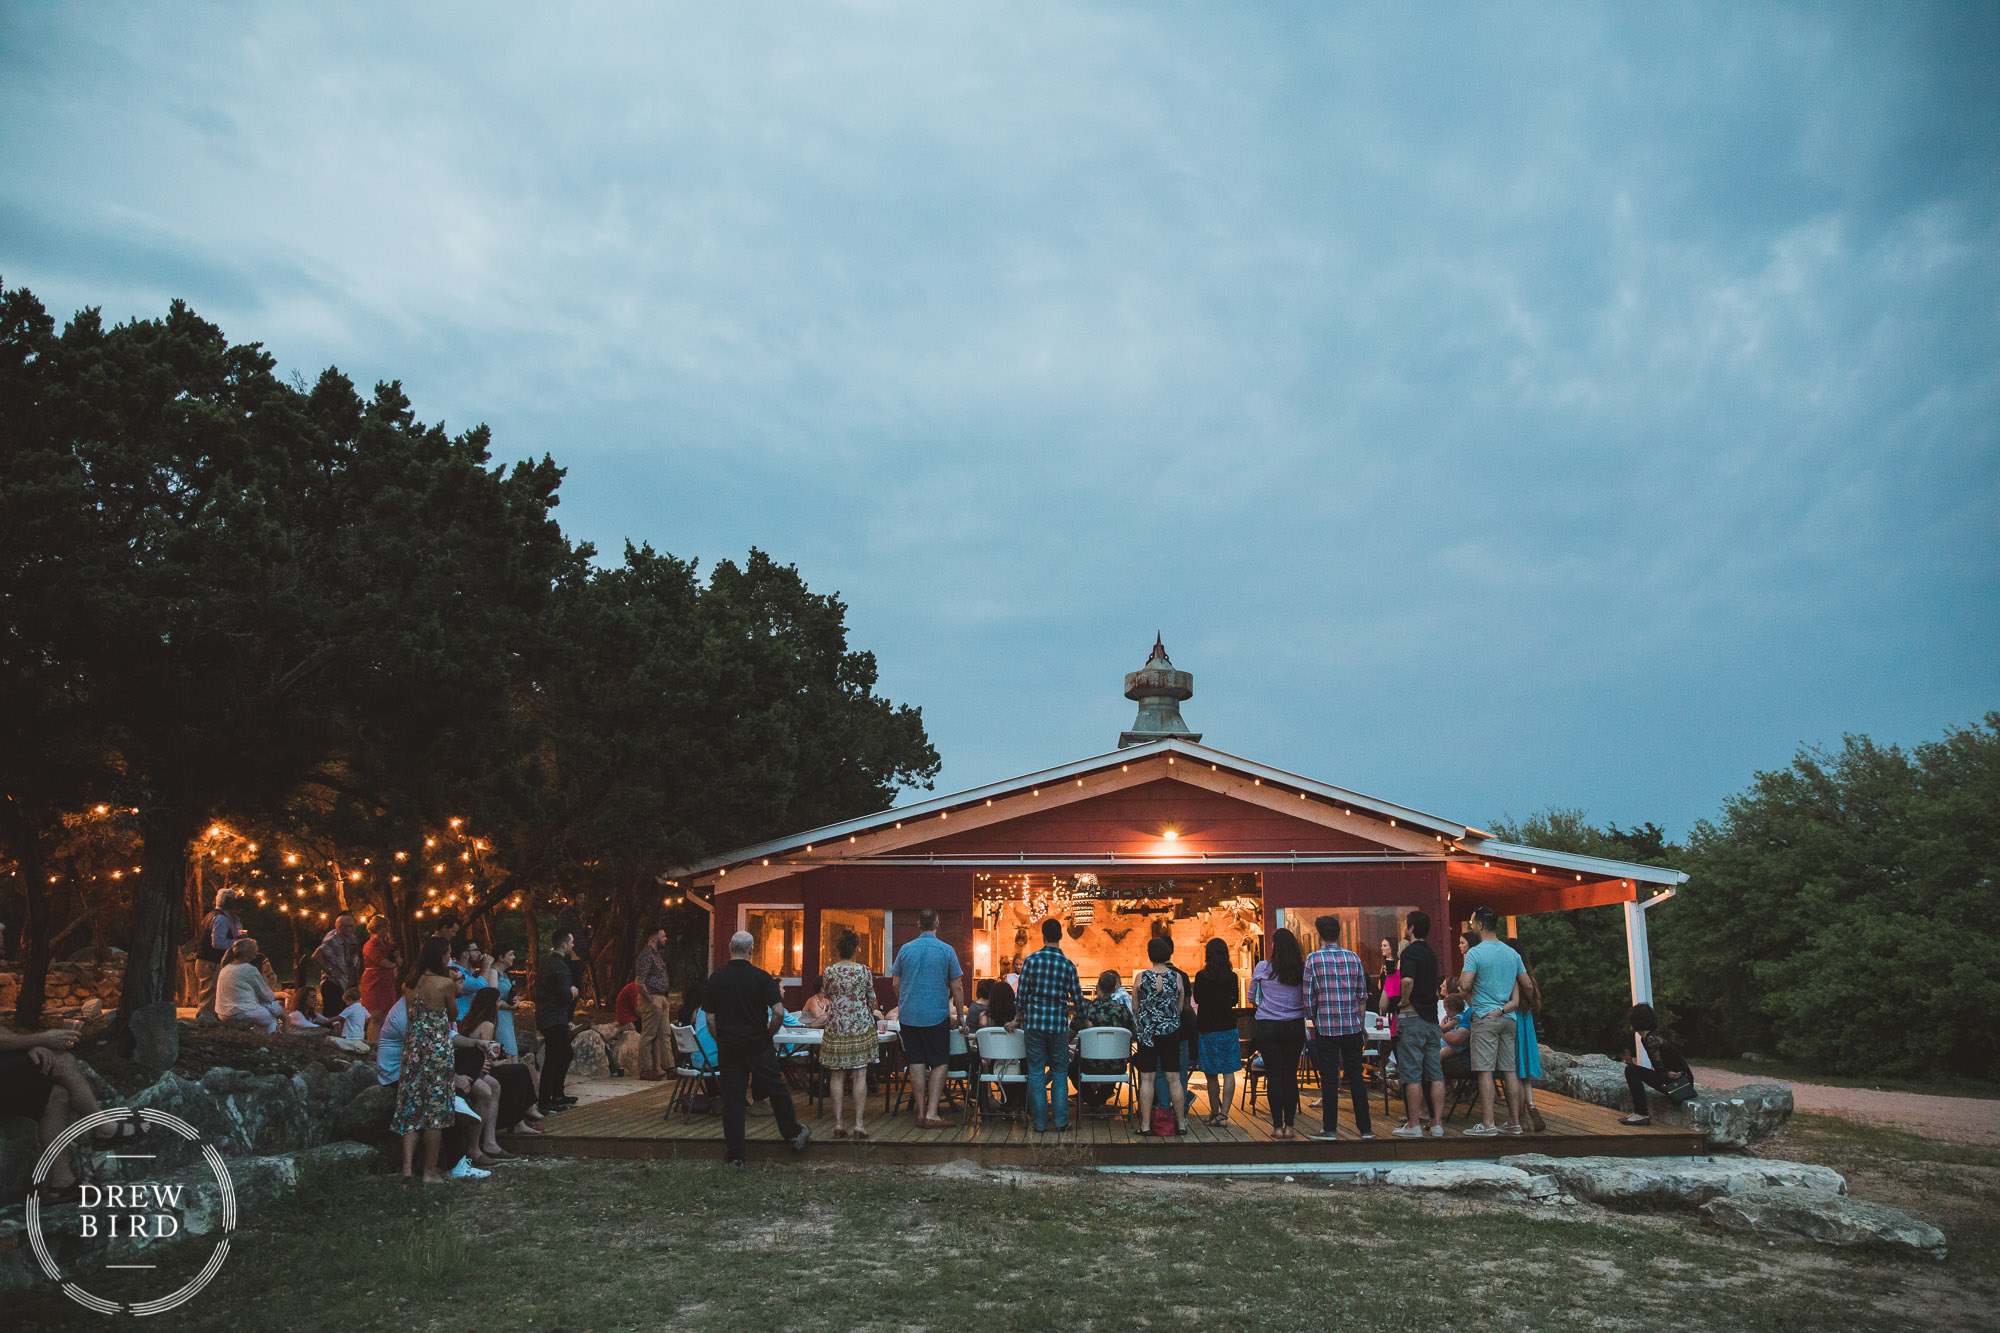 Rustic barn wedding welcome party at sunset. Speeches for a destination wedding photography story in Austin Texas.